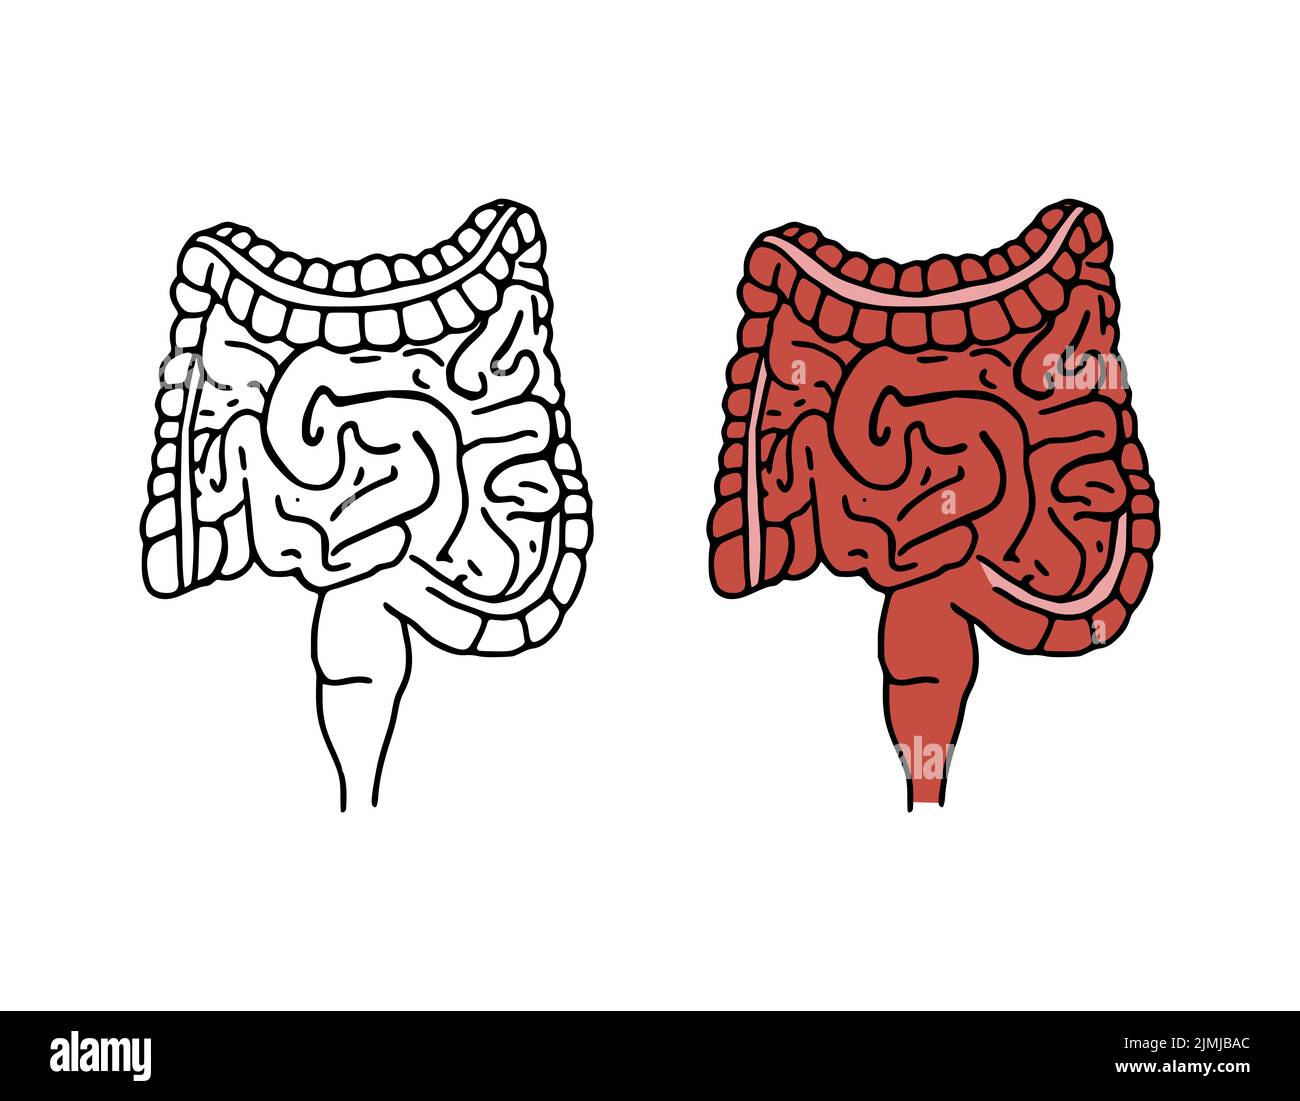 Intestines doodle vector illustration. Digestive system cartoon icons isolated on white background. Human internal organ in hand Stock Photo